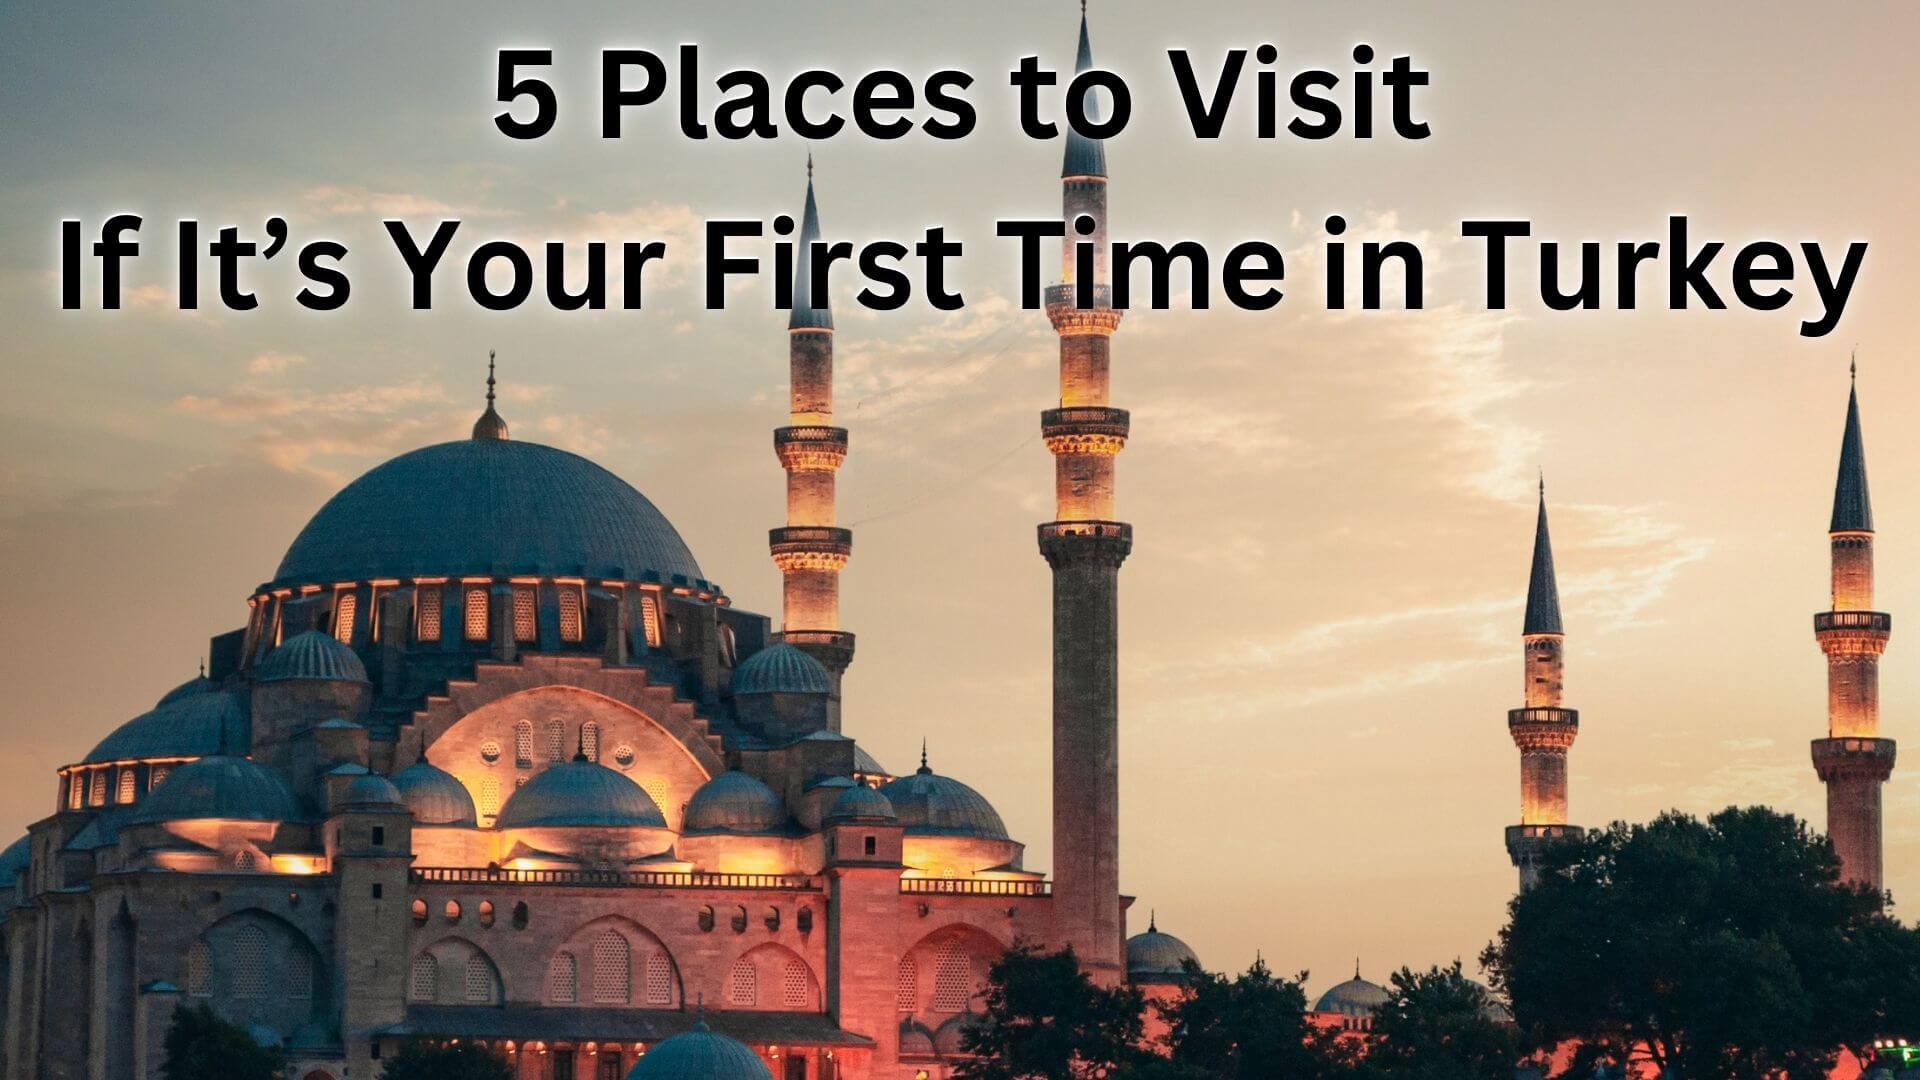 5 Places to Visit If It’s Your First Time in Turkey